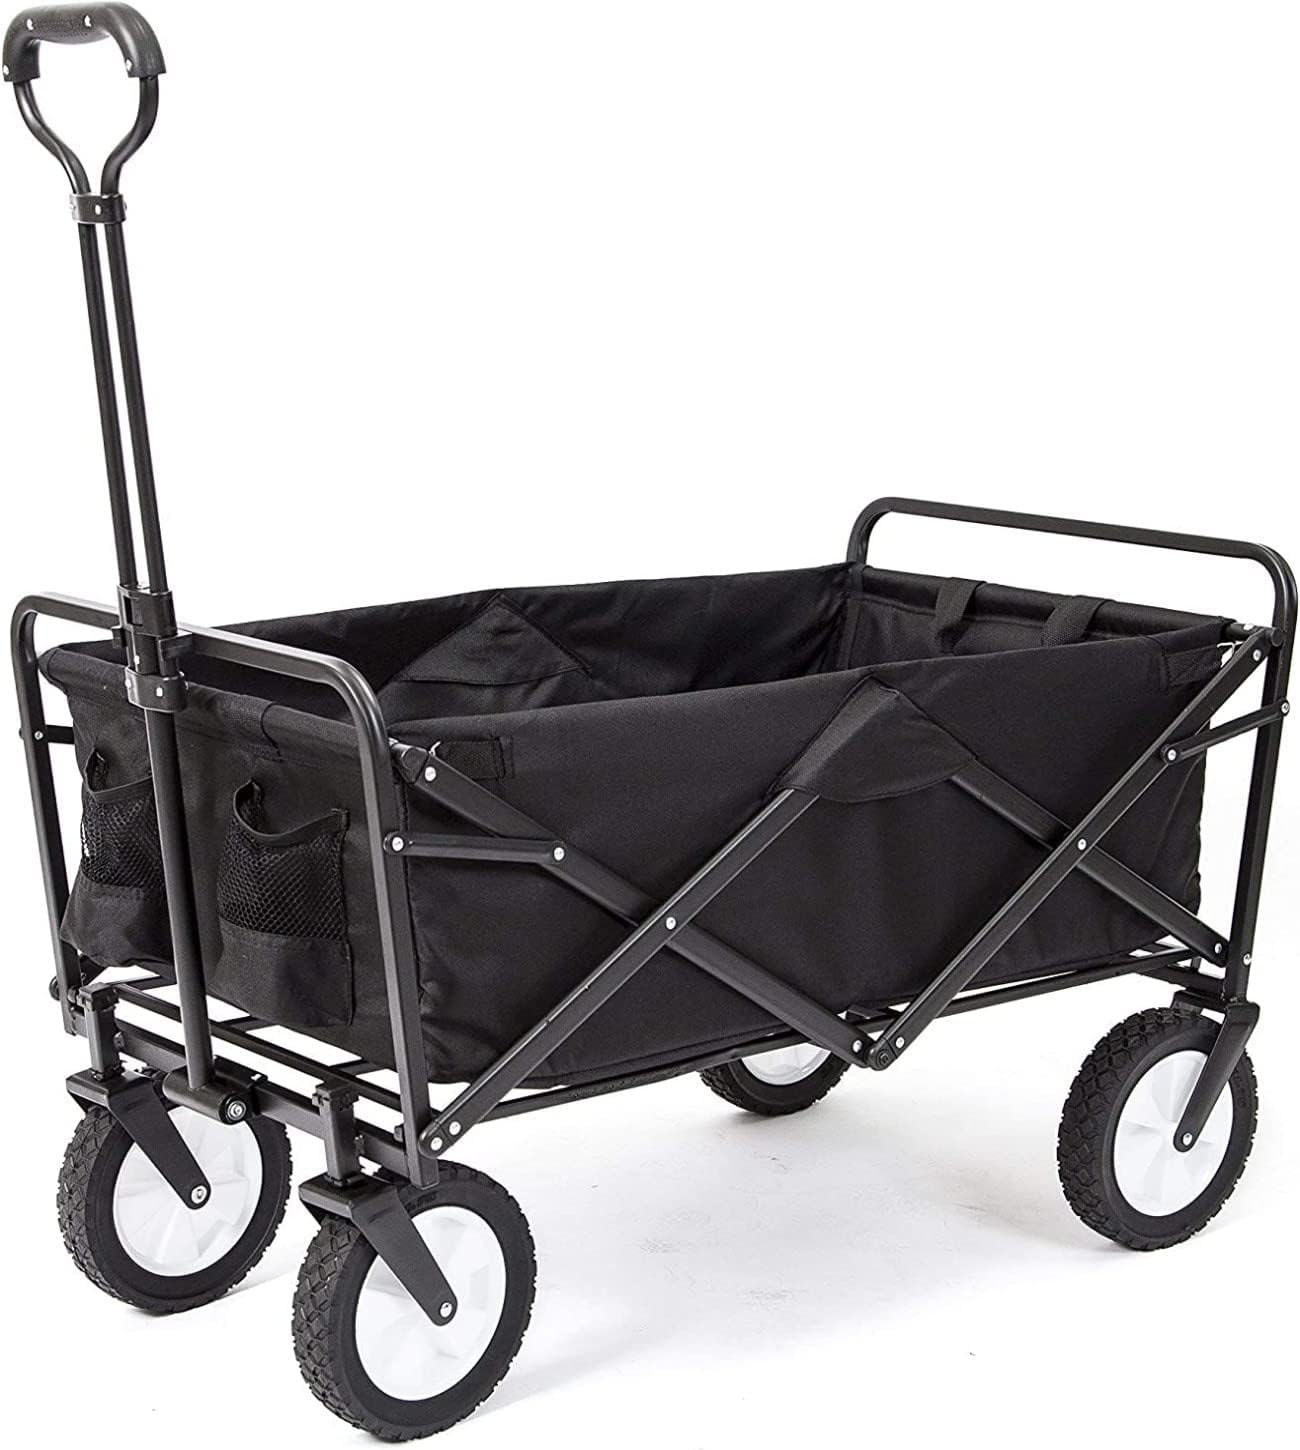 Garden Cart Folding Trolley Cart Outdoor Wagon Collapsible with Removable Fabric Festival Garden Camping Picnic Cart Supports Max 100kg Portable Transport Trailer